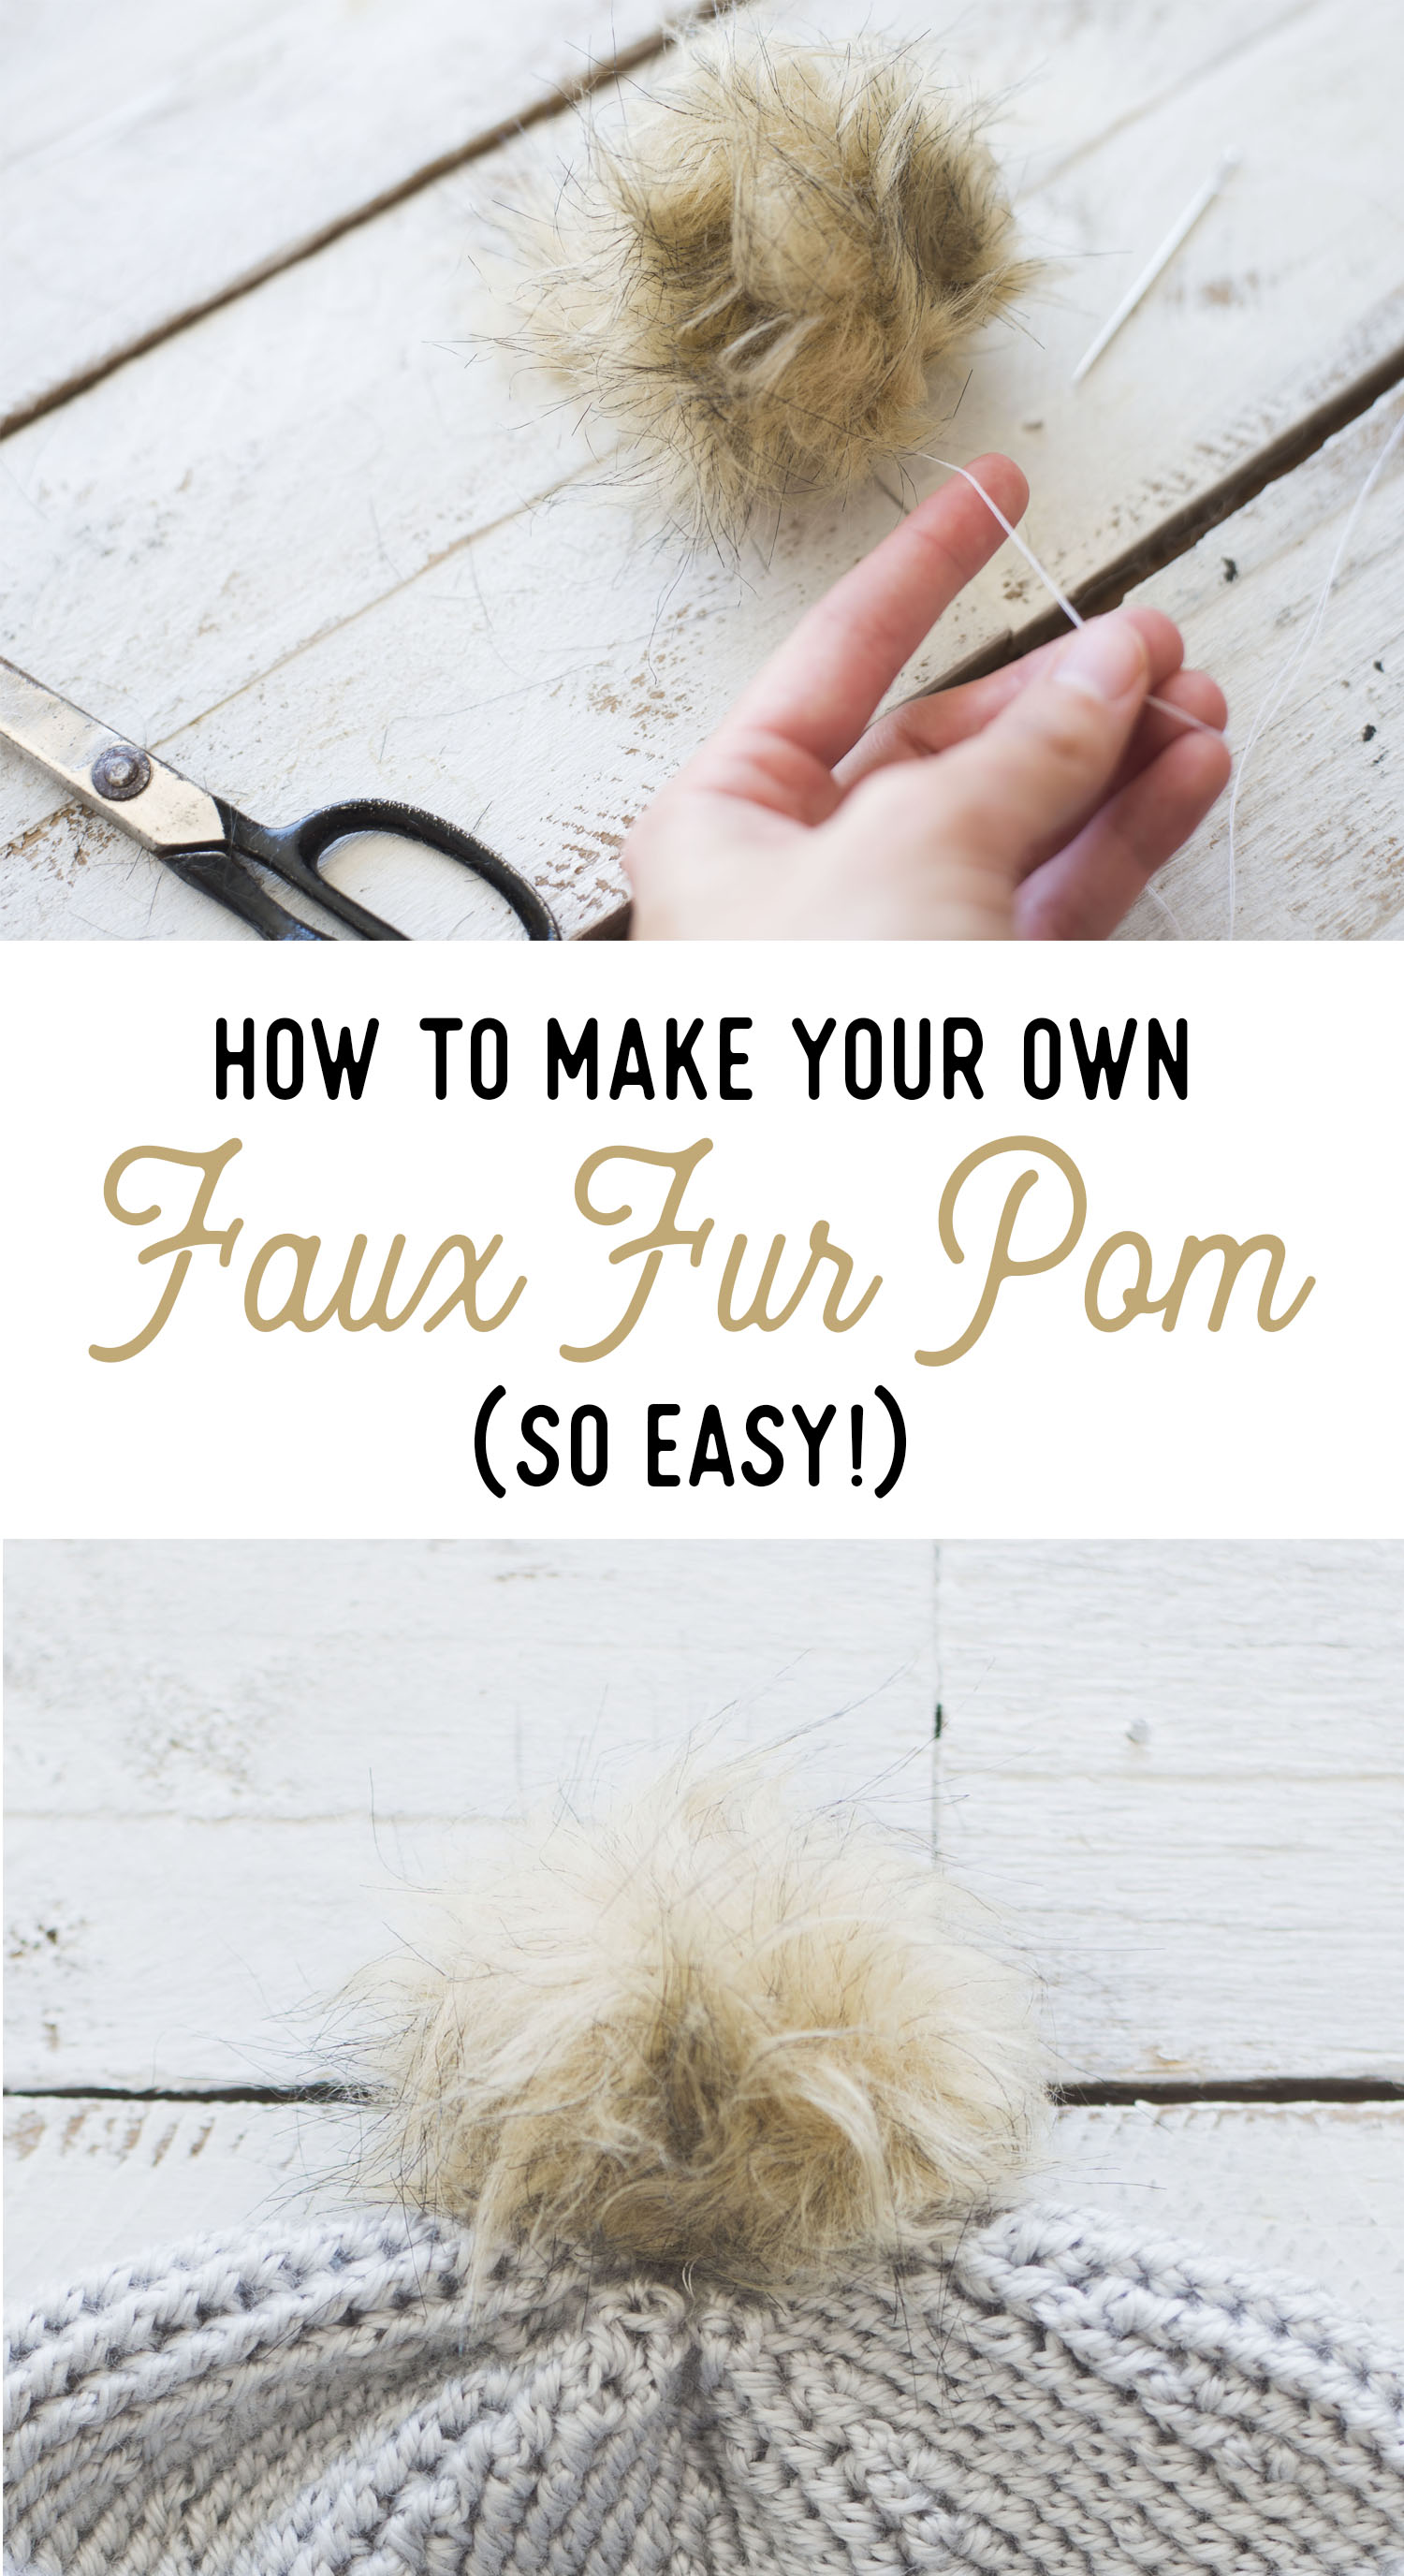 How to Make Your Own Faux Fur Pom (So Easy!) — Megmade with Love